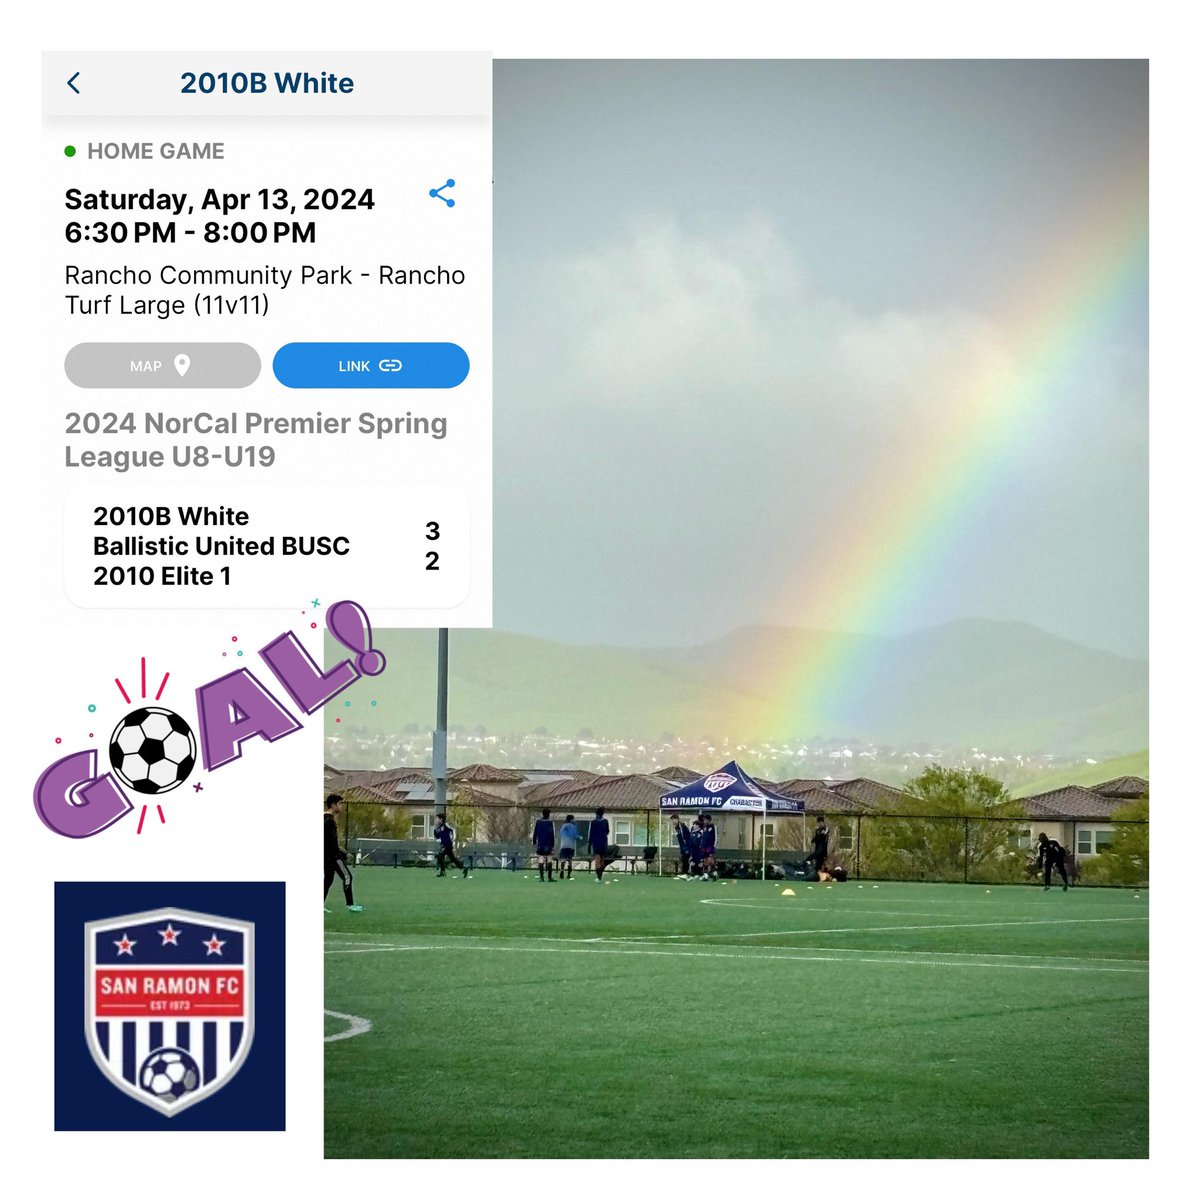 It’s Rainbow Season 🌈 The club cannot confirm if a pot of gold was found under the tent, but the 2010B White team had the golden touch on the pitch and earned a 3-2 win in league play yesterday. Thanks to Cathy W. for sending this terrific pic! #sanramonfc #soccer #rainbow